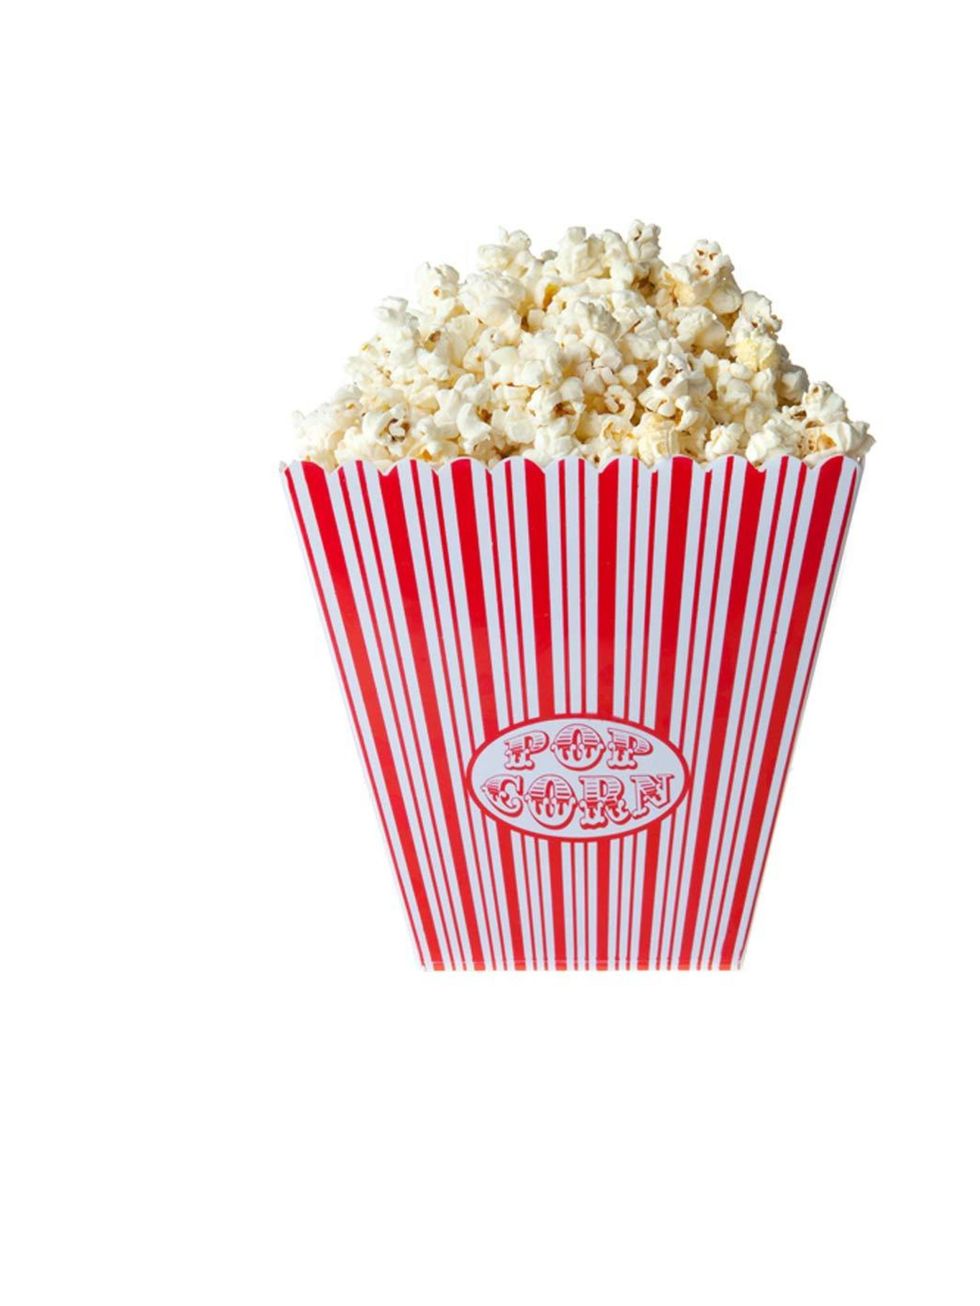 <p>'The key here is to make it yourself as a lot of shop bought brands can have lots of hidden extra sugar and salt' recommends Lucy.</p><p>When making popcorn at home just use the popcorn kernals. 'If you have a sweet tooth add a stick of vanilla into th